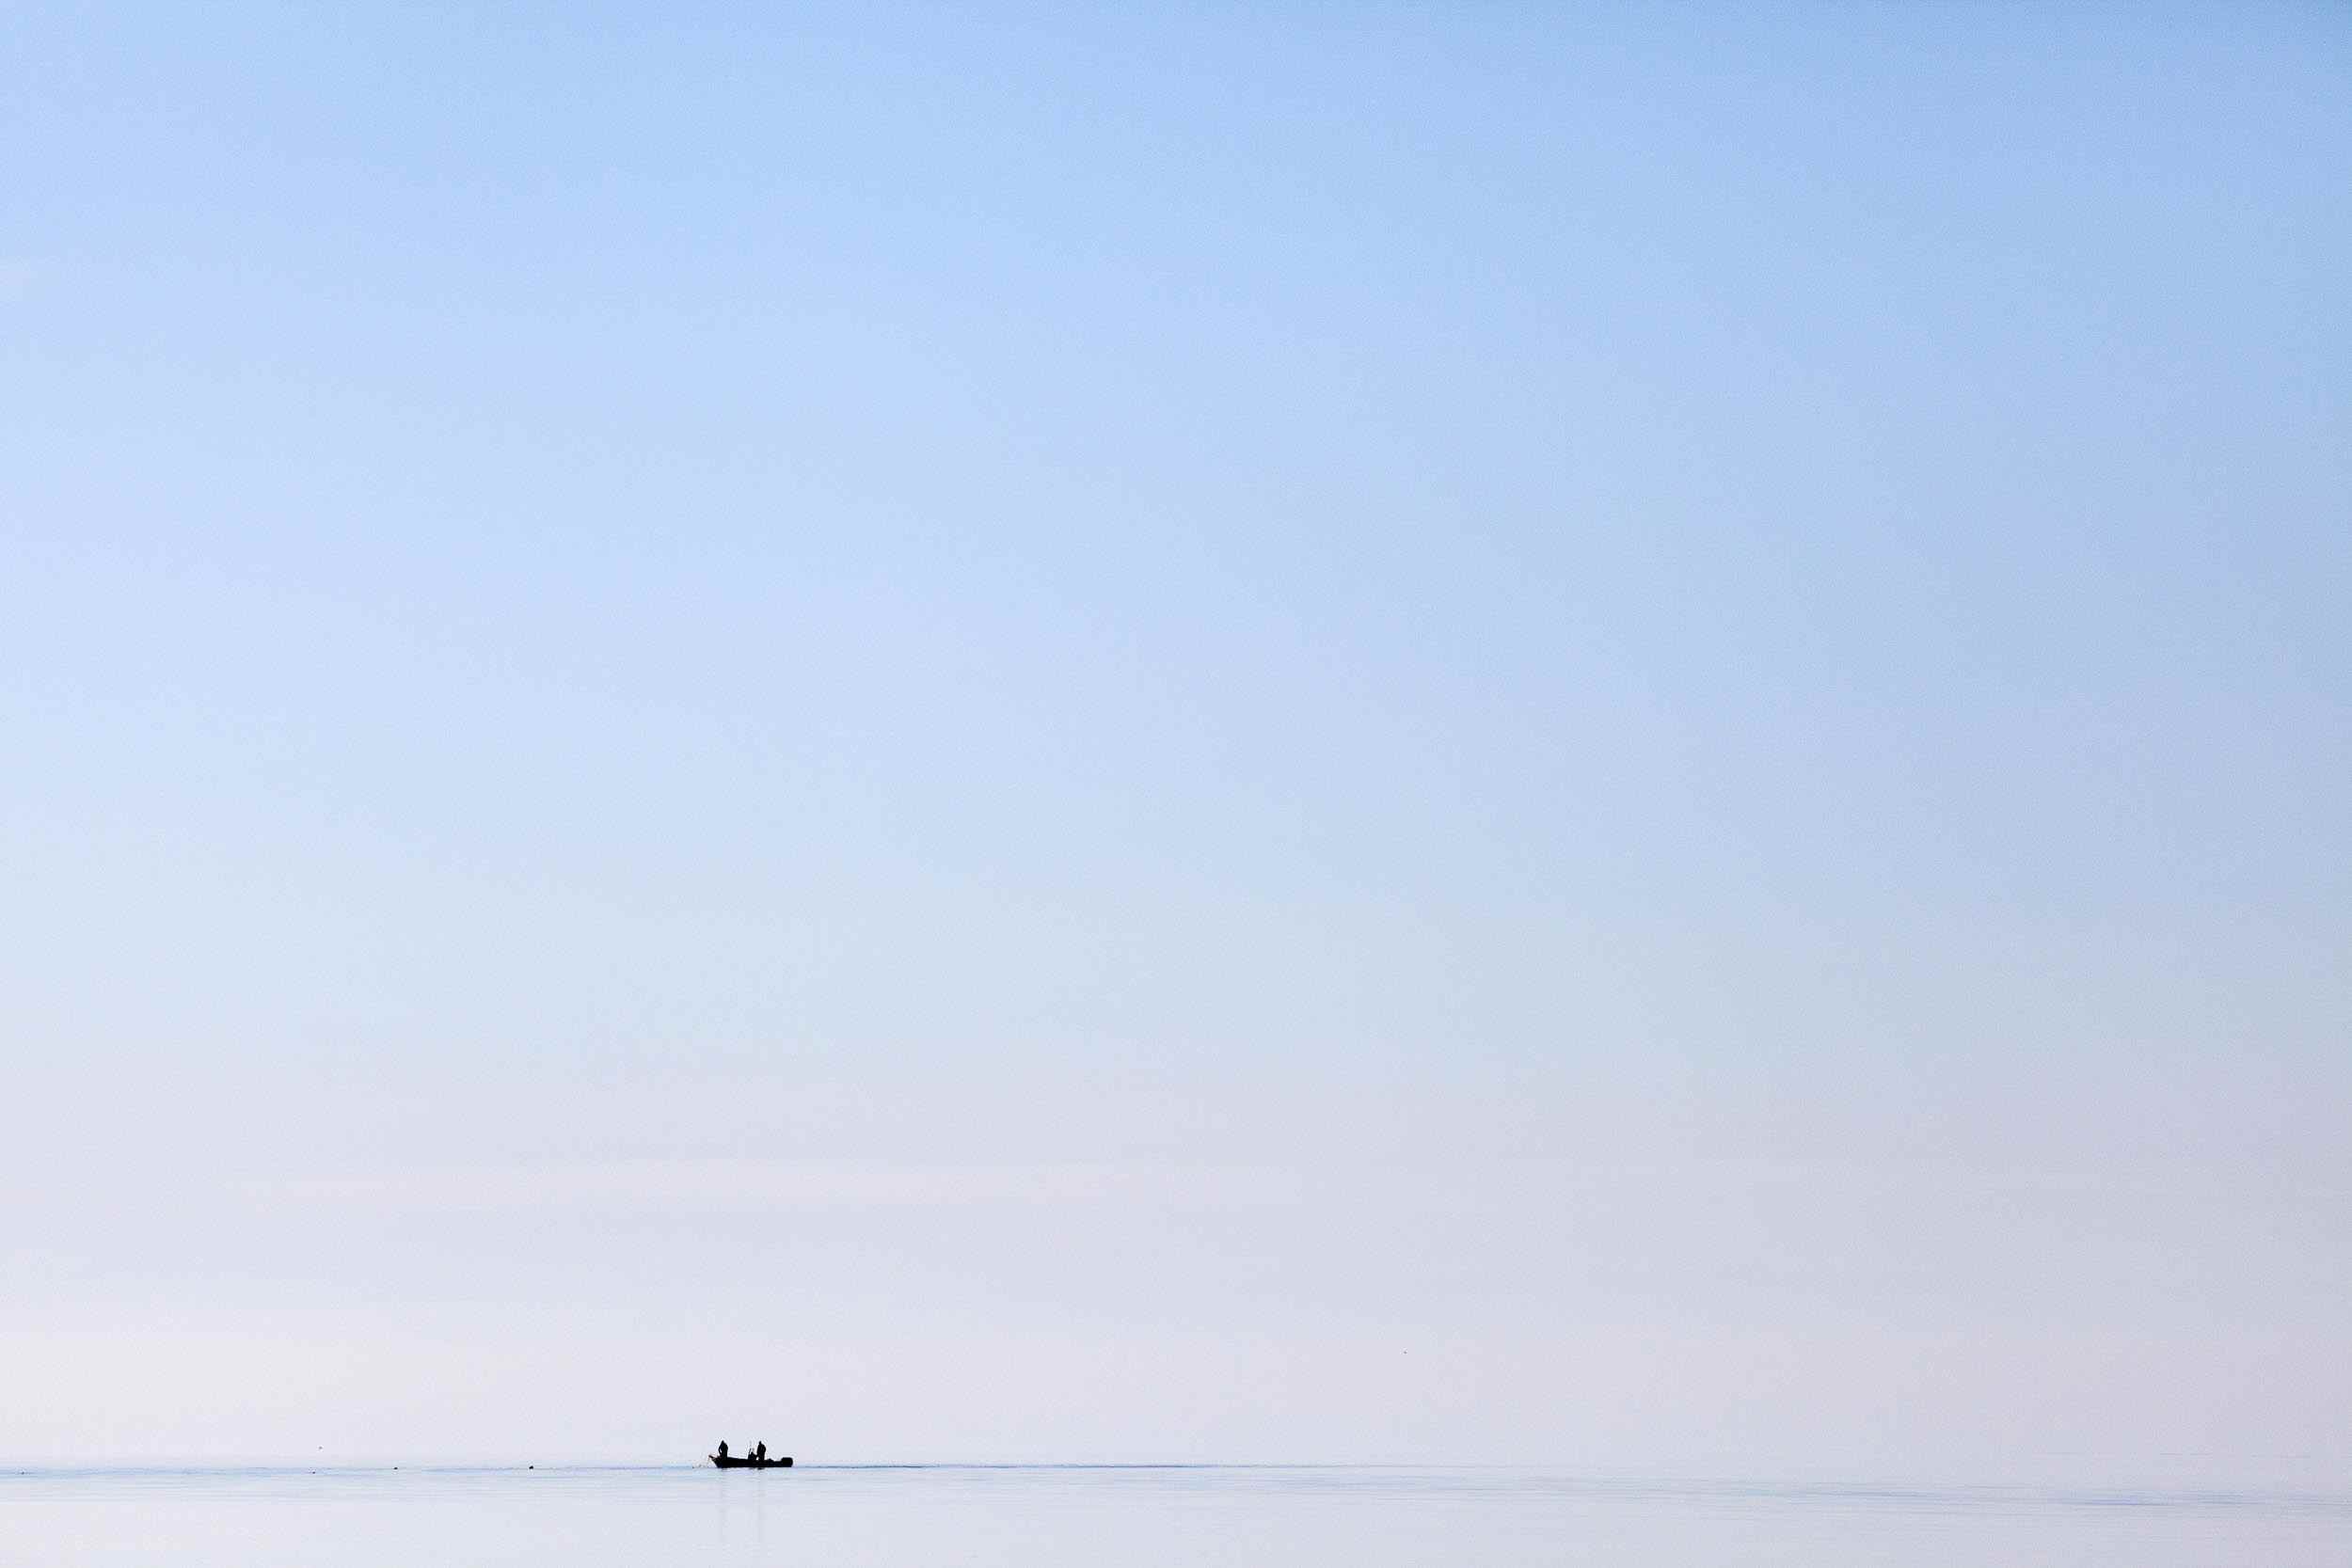 A small fishing boat on the horizon of a calm sea.